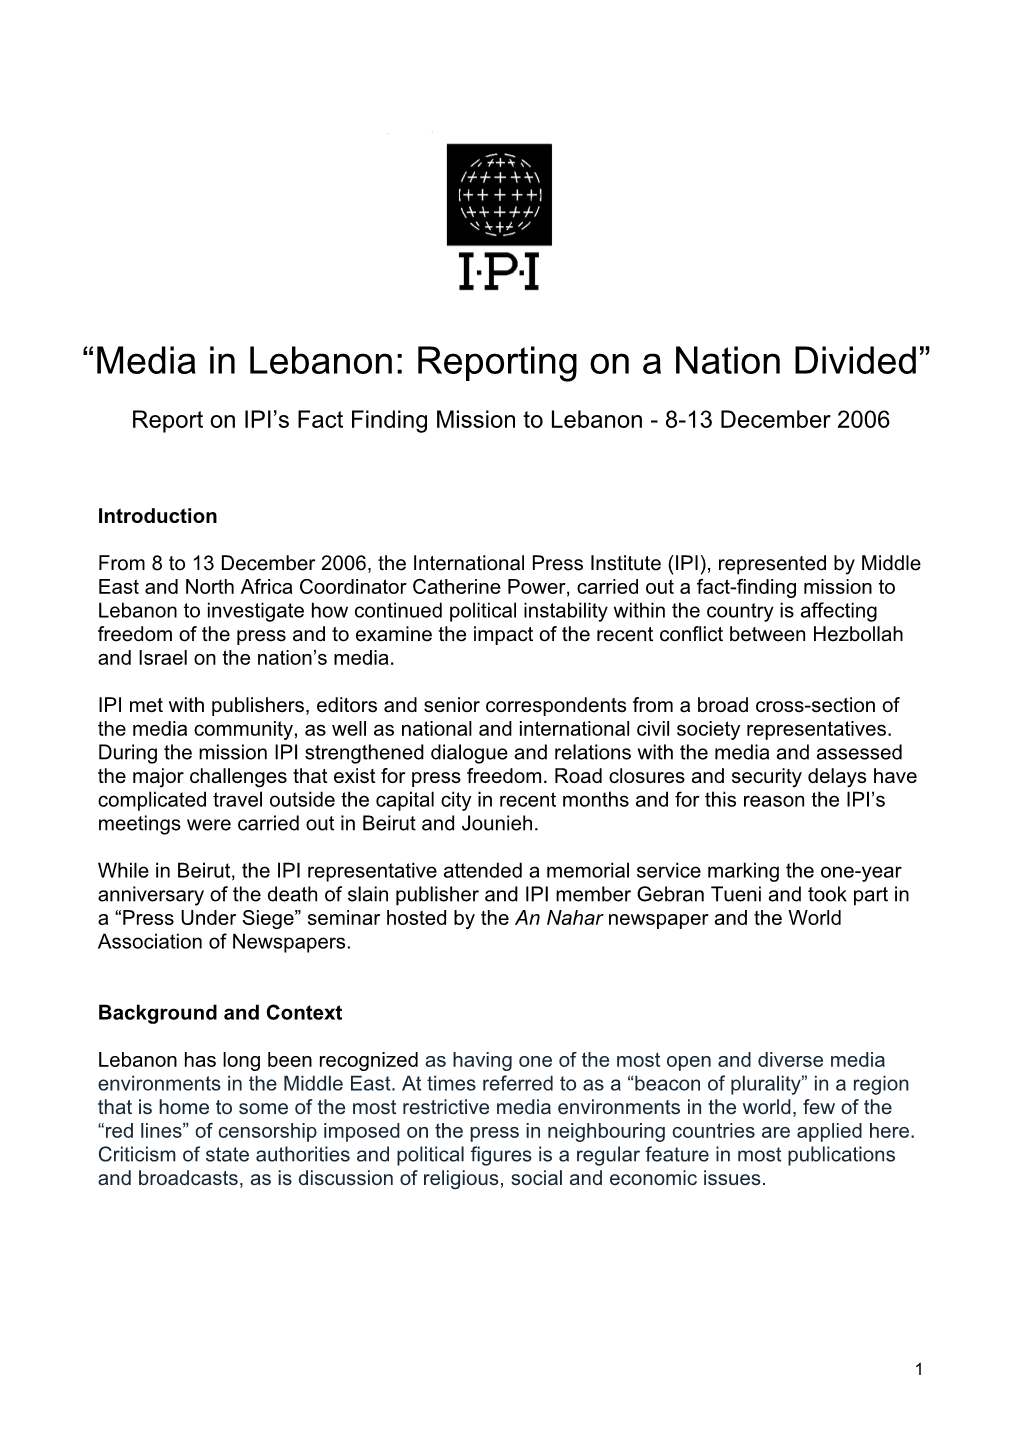 “Media in Lebanon: Reporting on a Nation Divided”